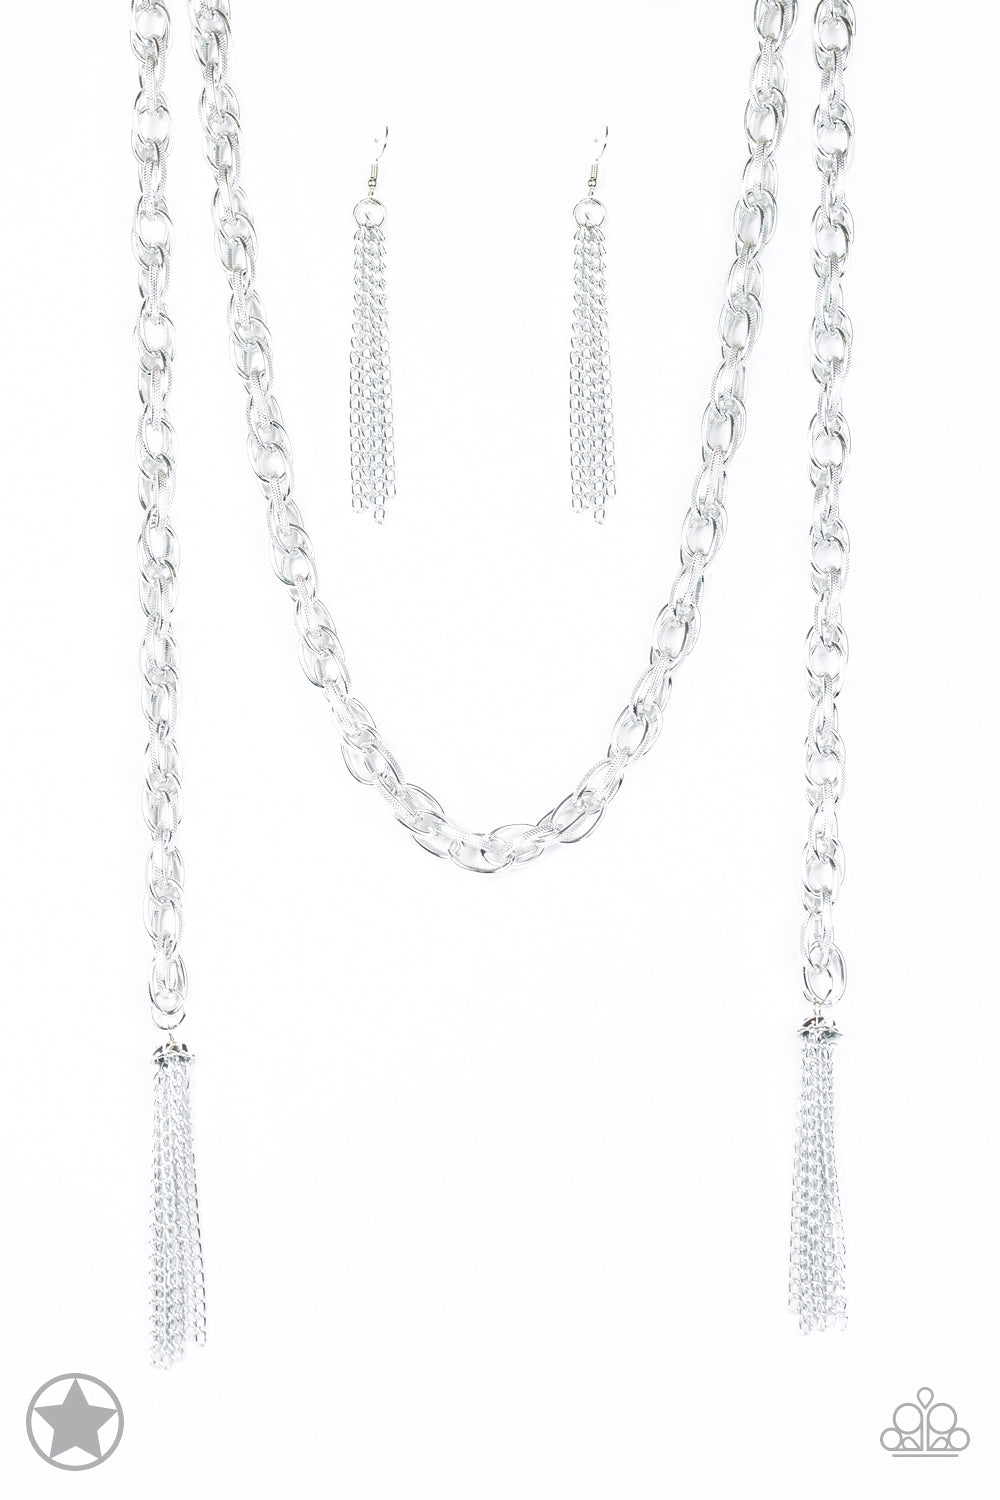 A single strand of spiraling, interlocking links with light-catching texture is anchored by two tassels of chain that add dramatic length to the piece. Undeniably the most versatile piece in Paparazzi's history, the scarf necklace features FIVE different ways to accessorize: Open Layer, Loop, Traditional Wrap, Double Knot, and Nautical Knot.